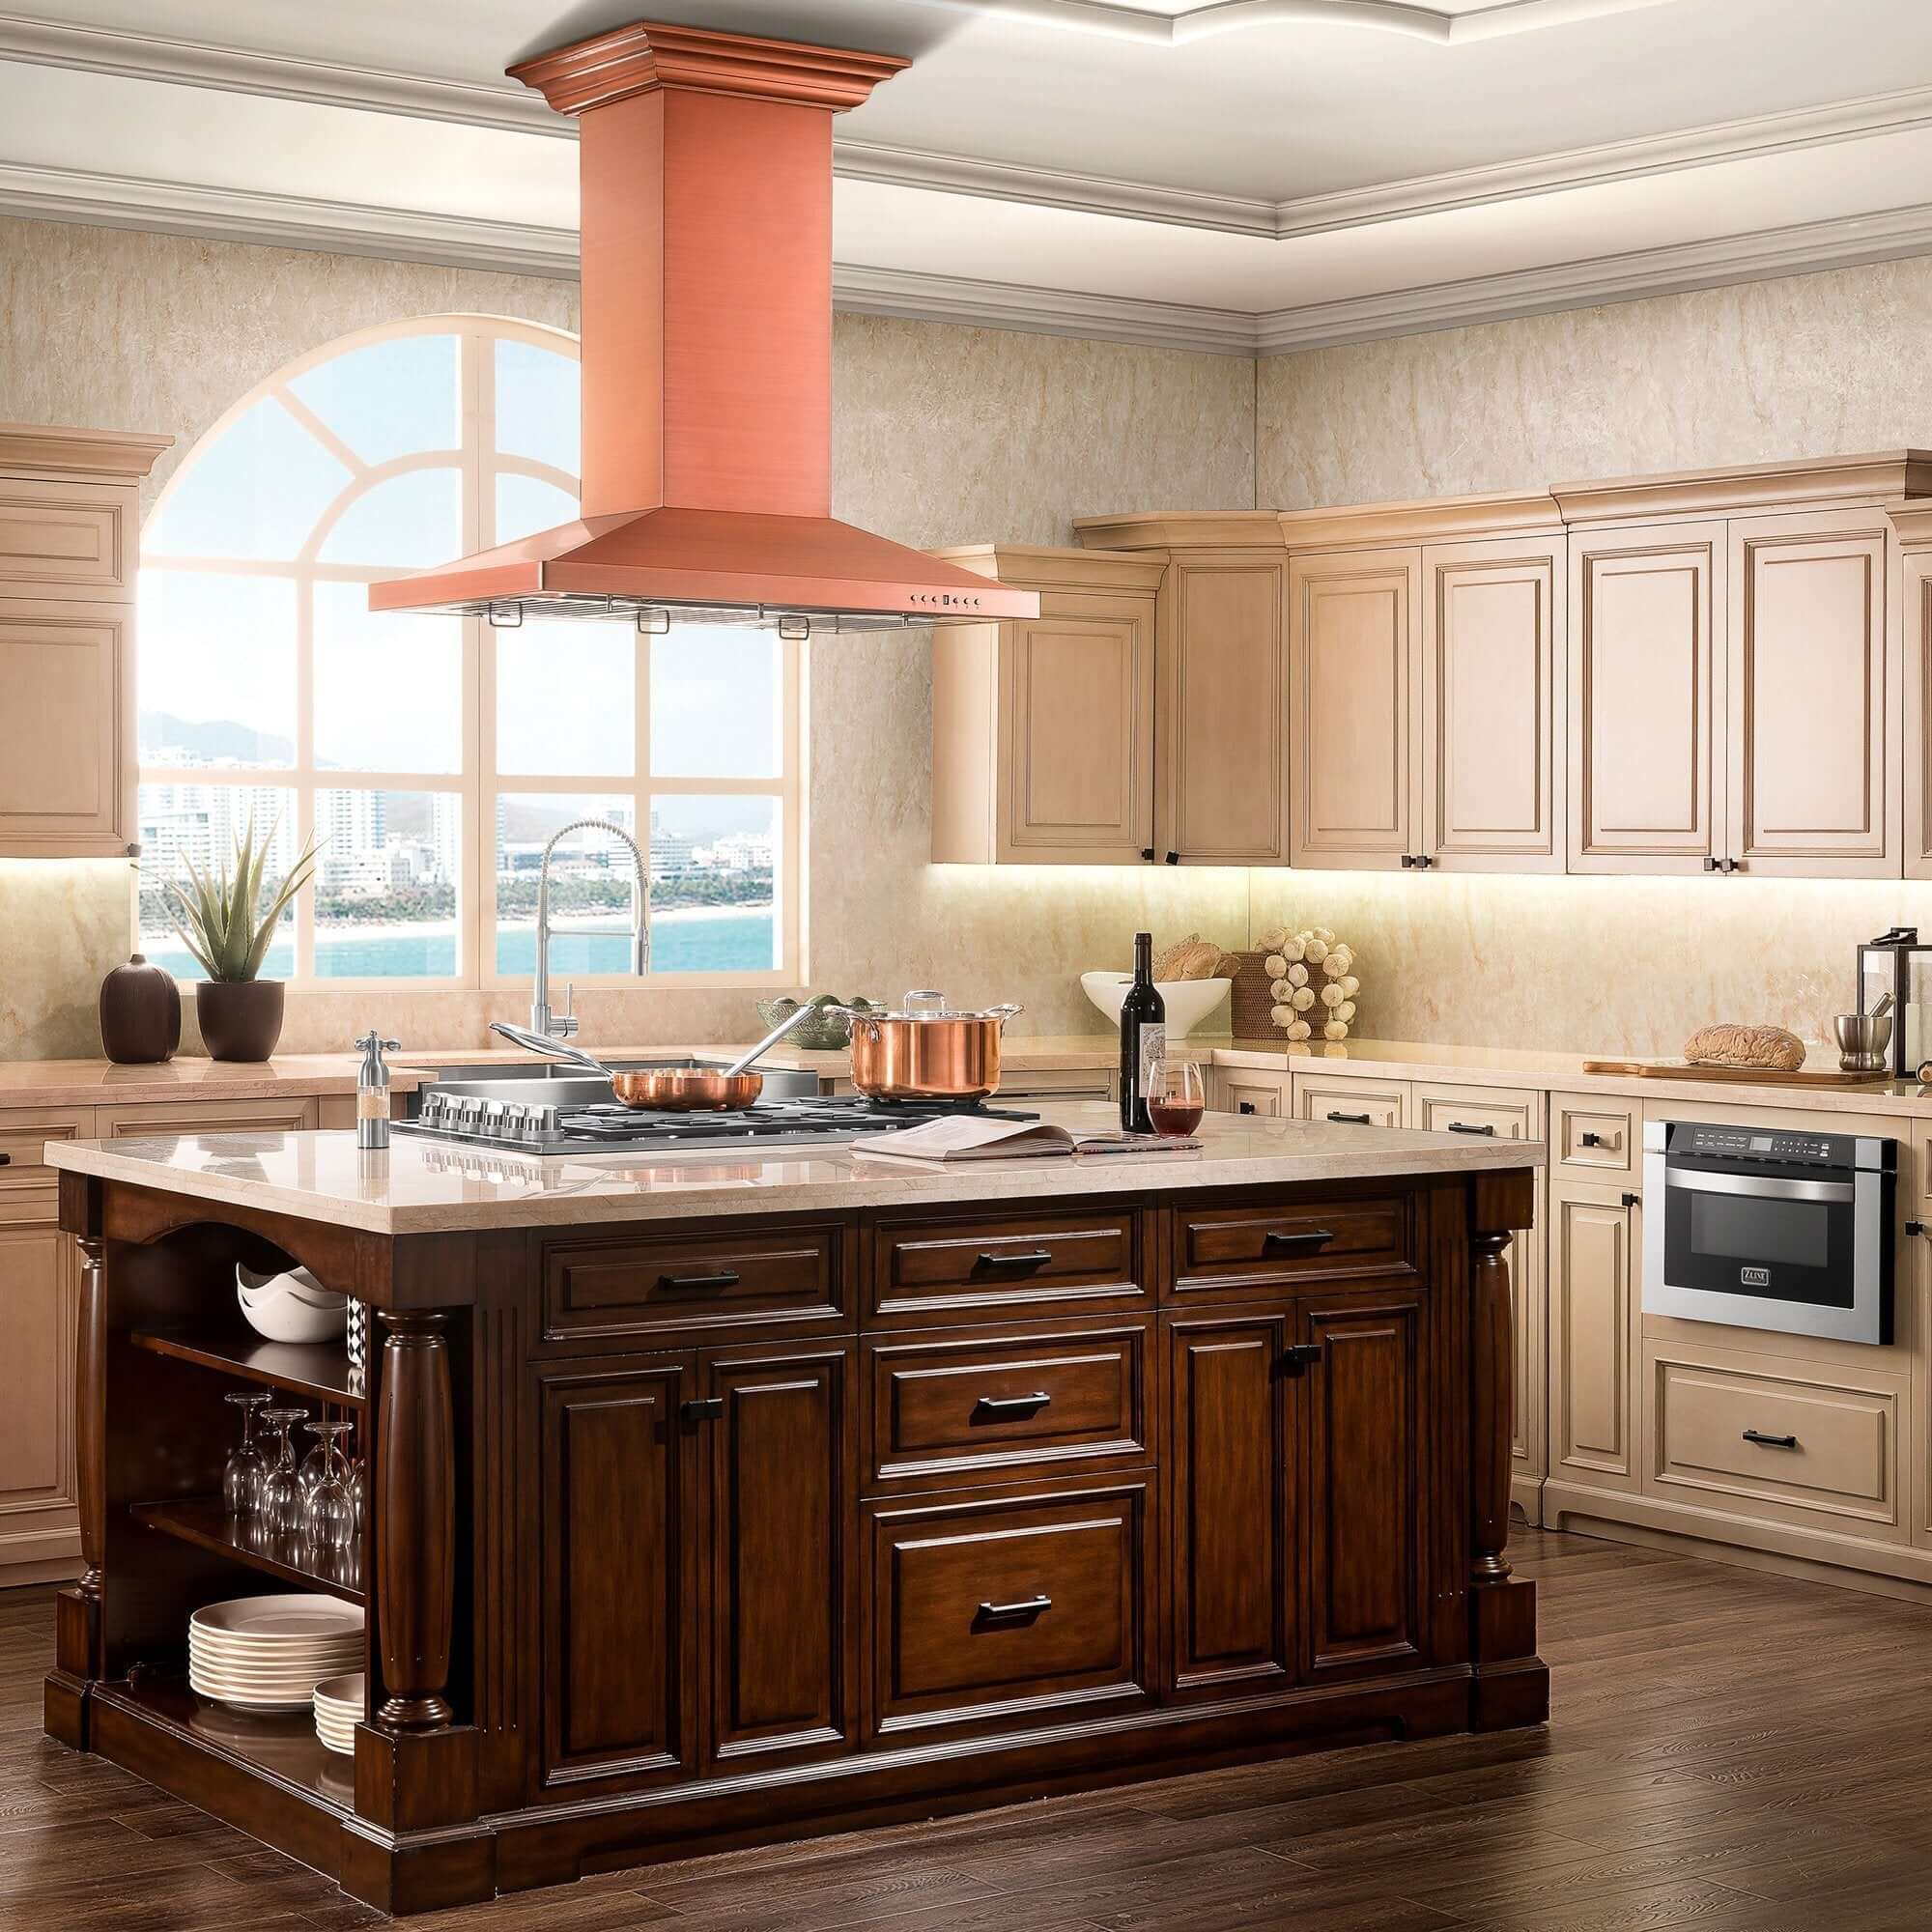 ZLINE 36 in. Designer Series Copper Island Mount Range Hood (8KL3iC-36) above a large kitchen island in a rustic kitchen wide angle.